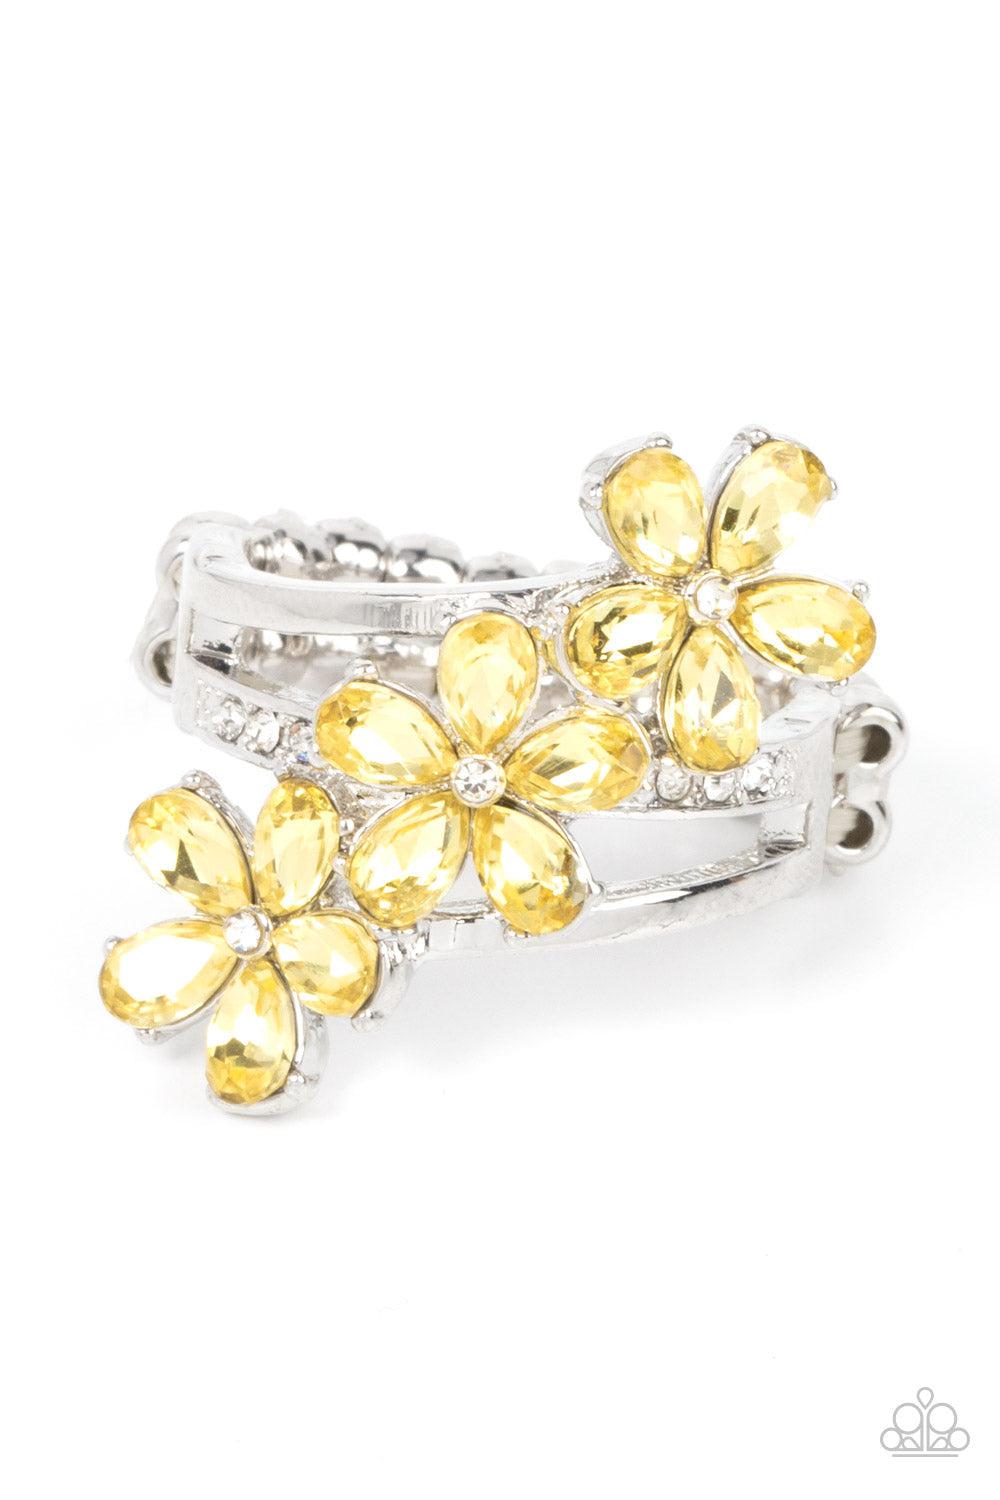 Posh Petals Yellow Flower Ring - Paparazzi Accessories- lightbox - CarasShop.com - $5 Jewelry by Cara Jewels